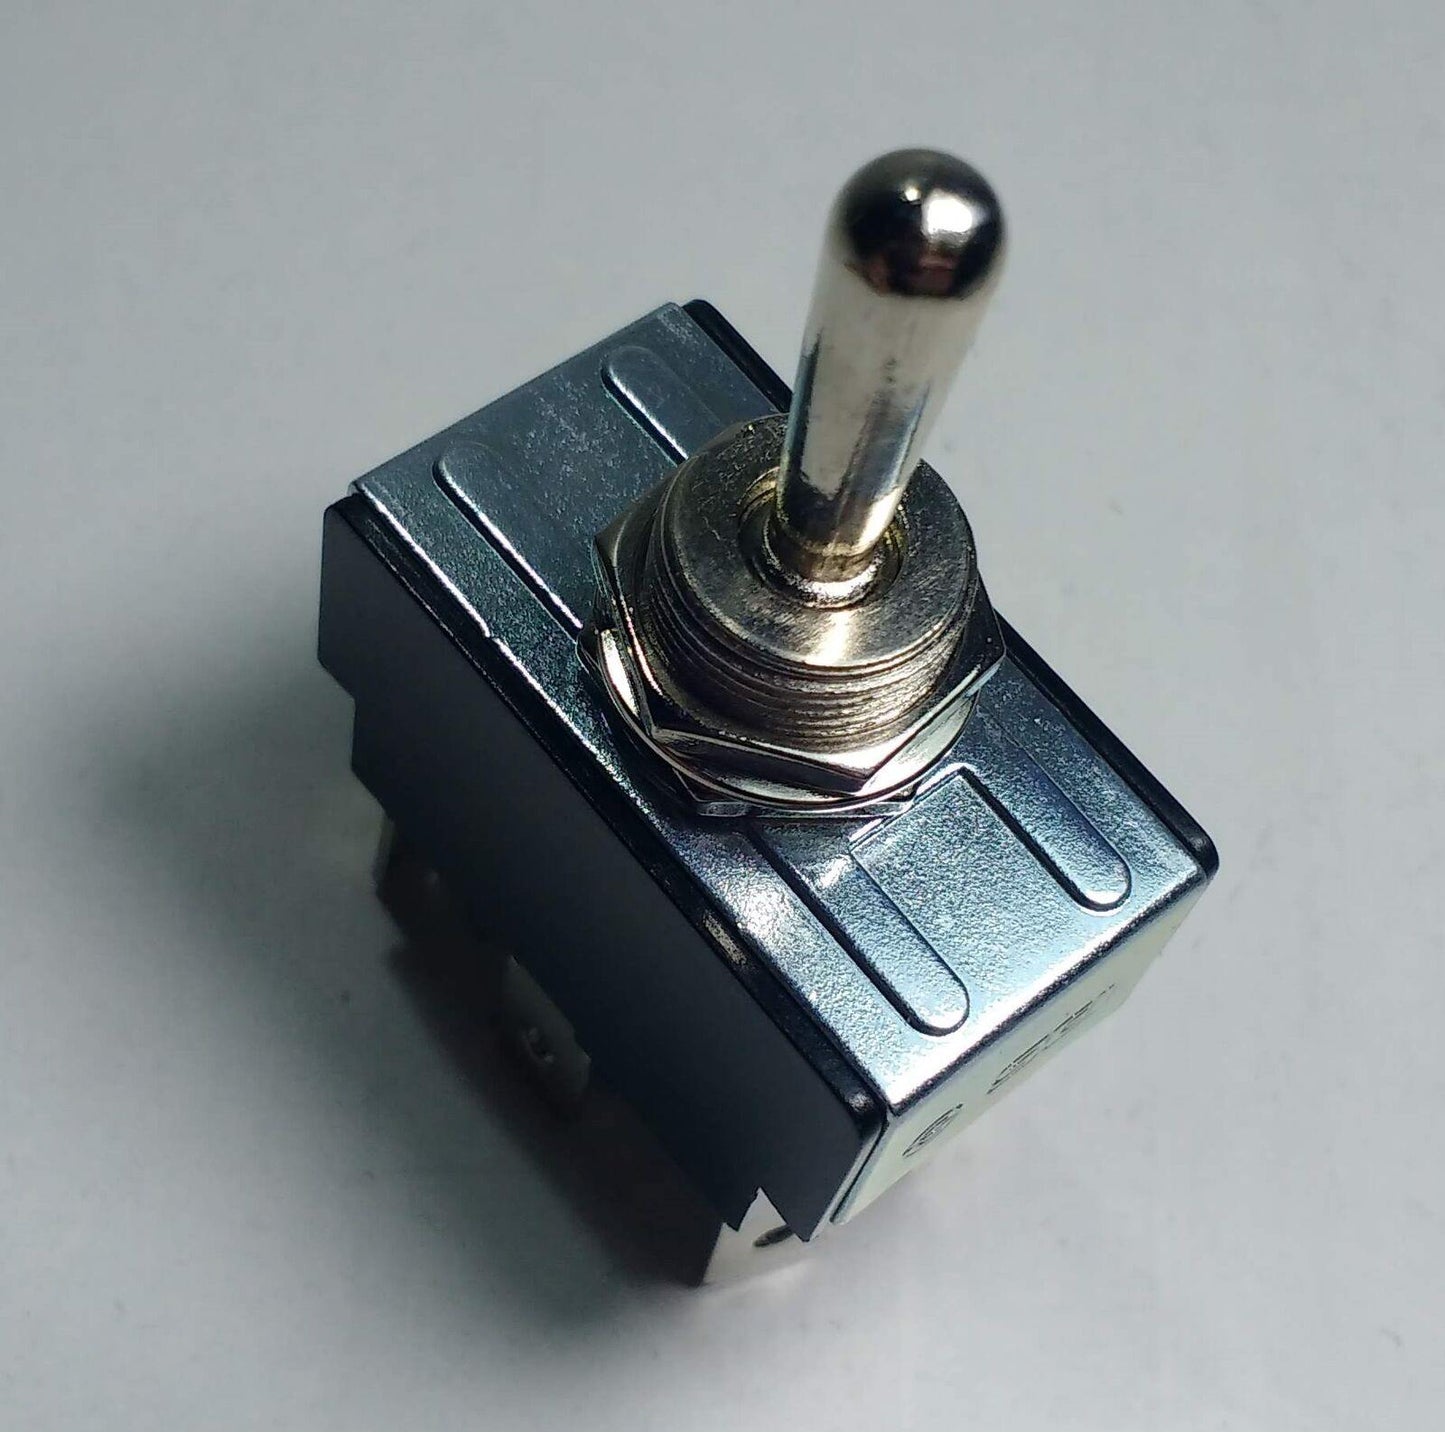 On/Off/(On) Toggle Switch 6 Terminals Spring Loaded 12V 16A 24V Cargo 180593 - Mid-Ulster Rotating Electrics Ltd